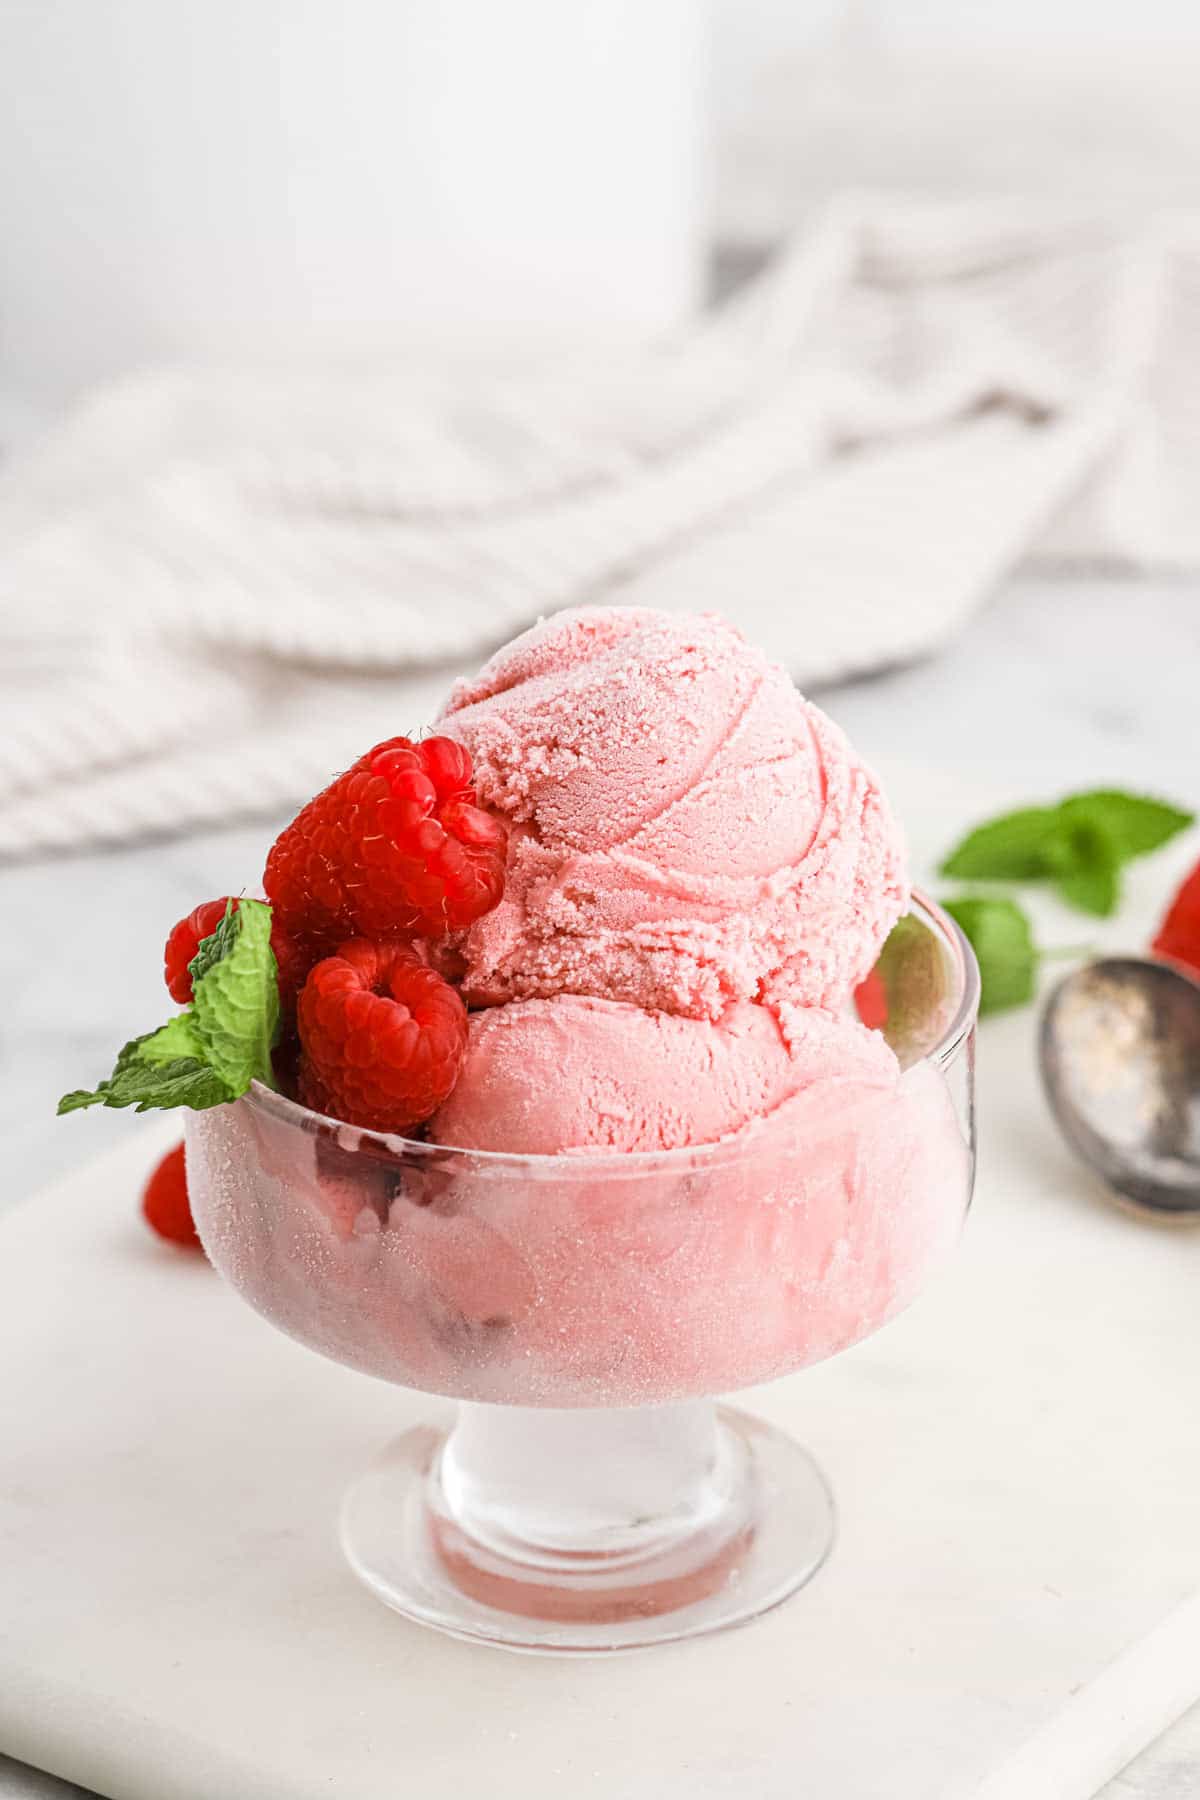 Raspberry ice cream scooped into a glass dessert cup and topped with fresh raspberries.